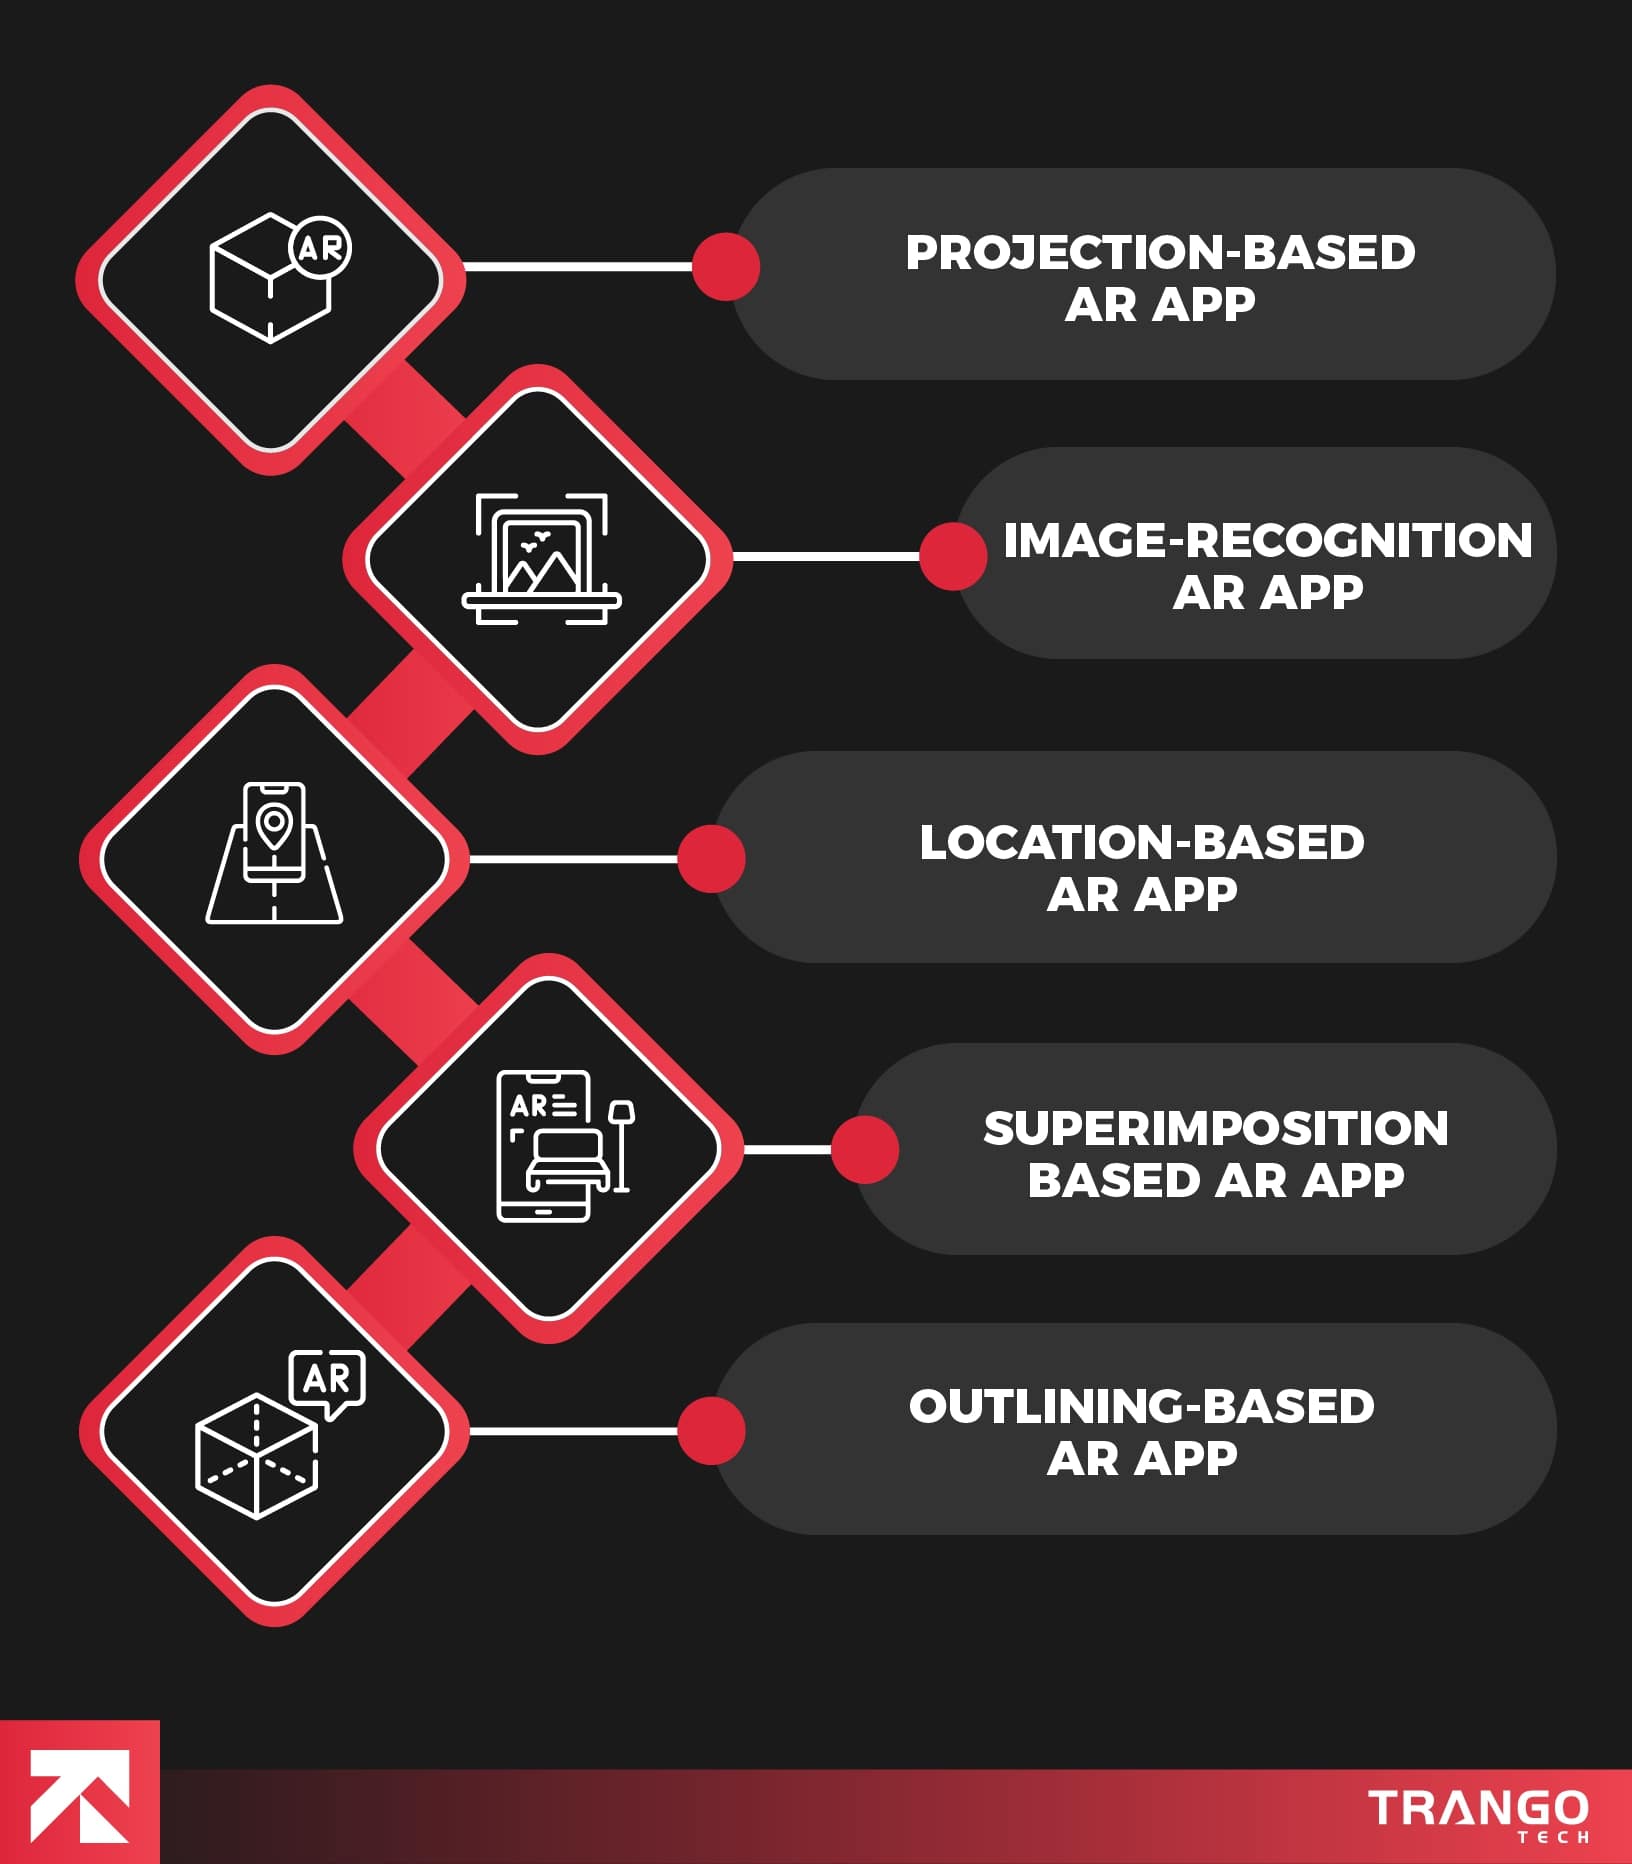 infographic showing types of augmented reality apps